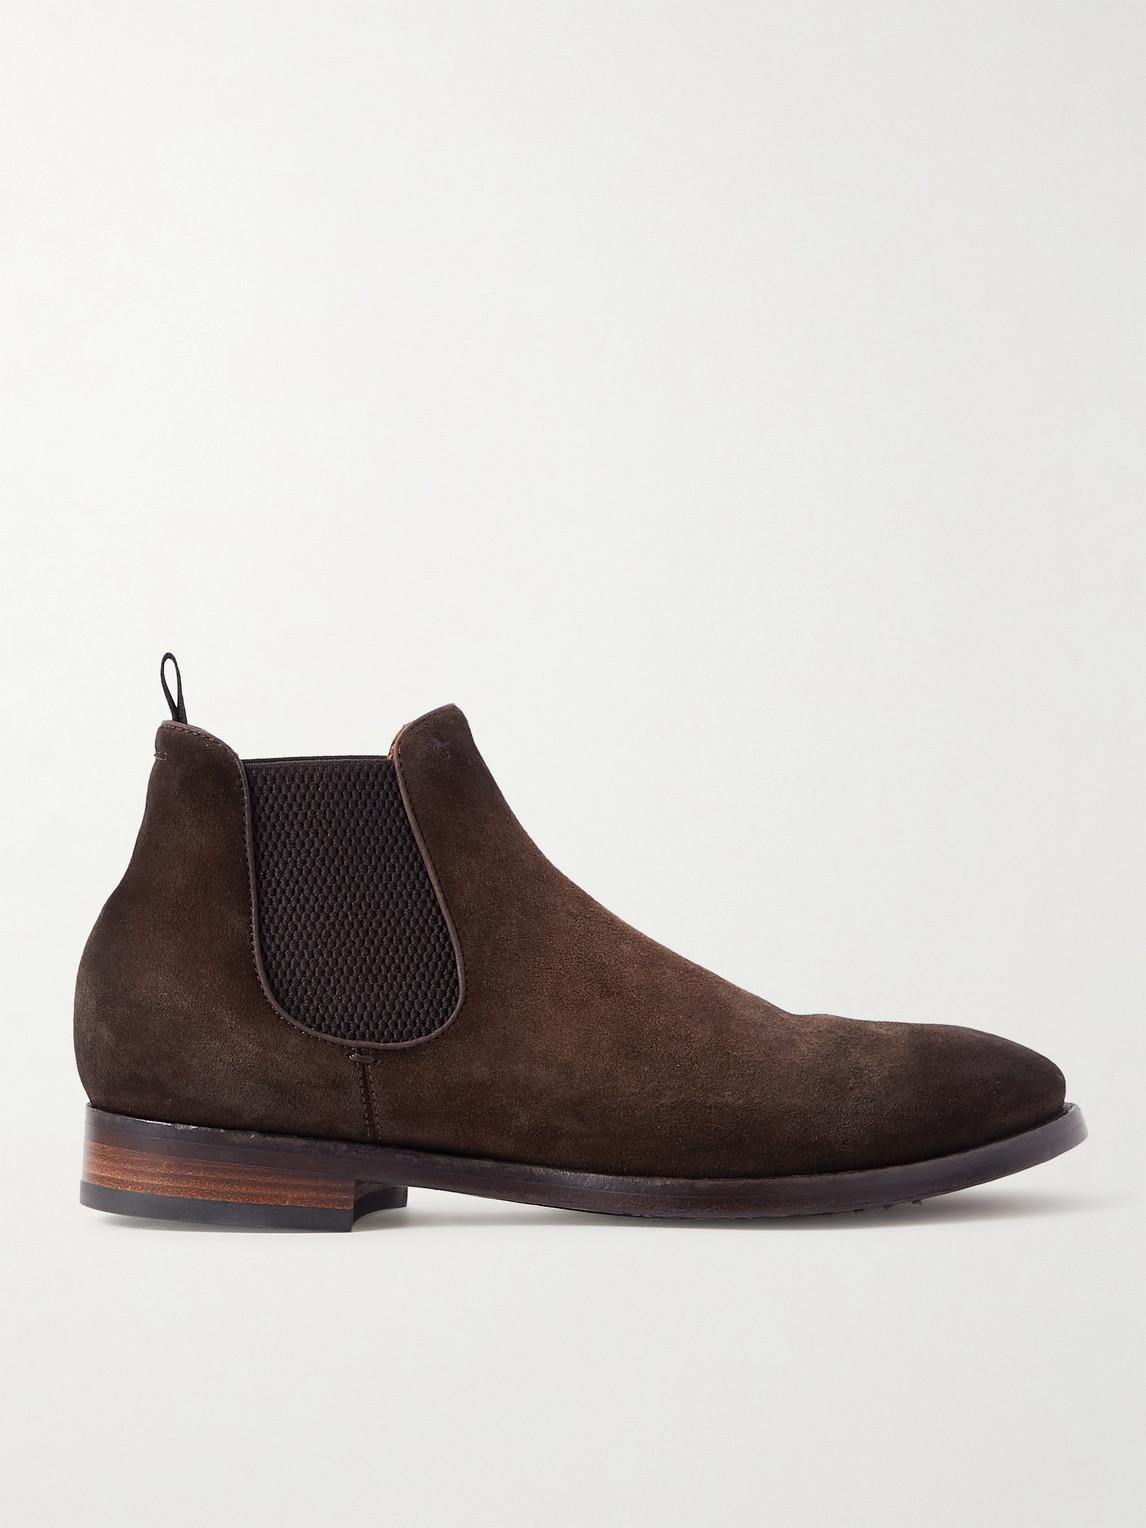 OFFICINE CREATIVE PROVIDENCE SUEDE CHELSEA BOOTS